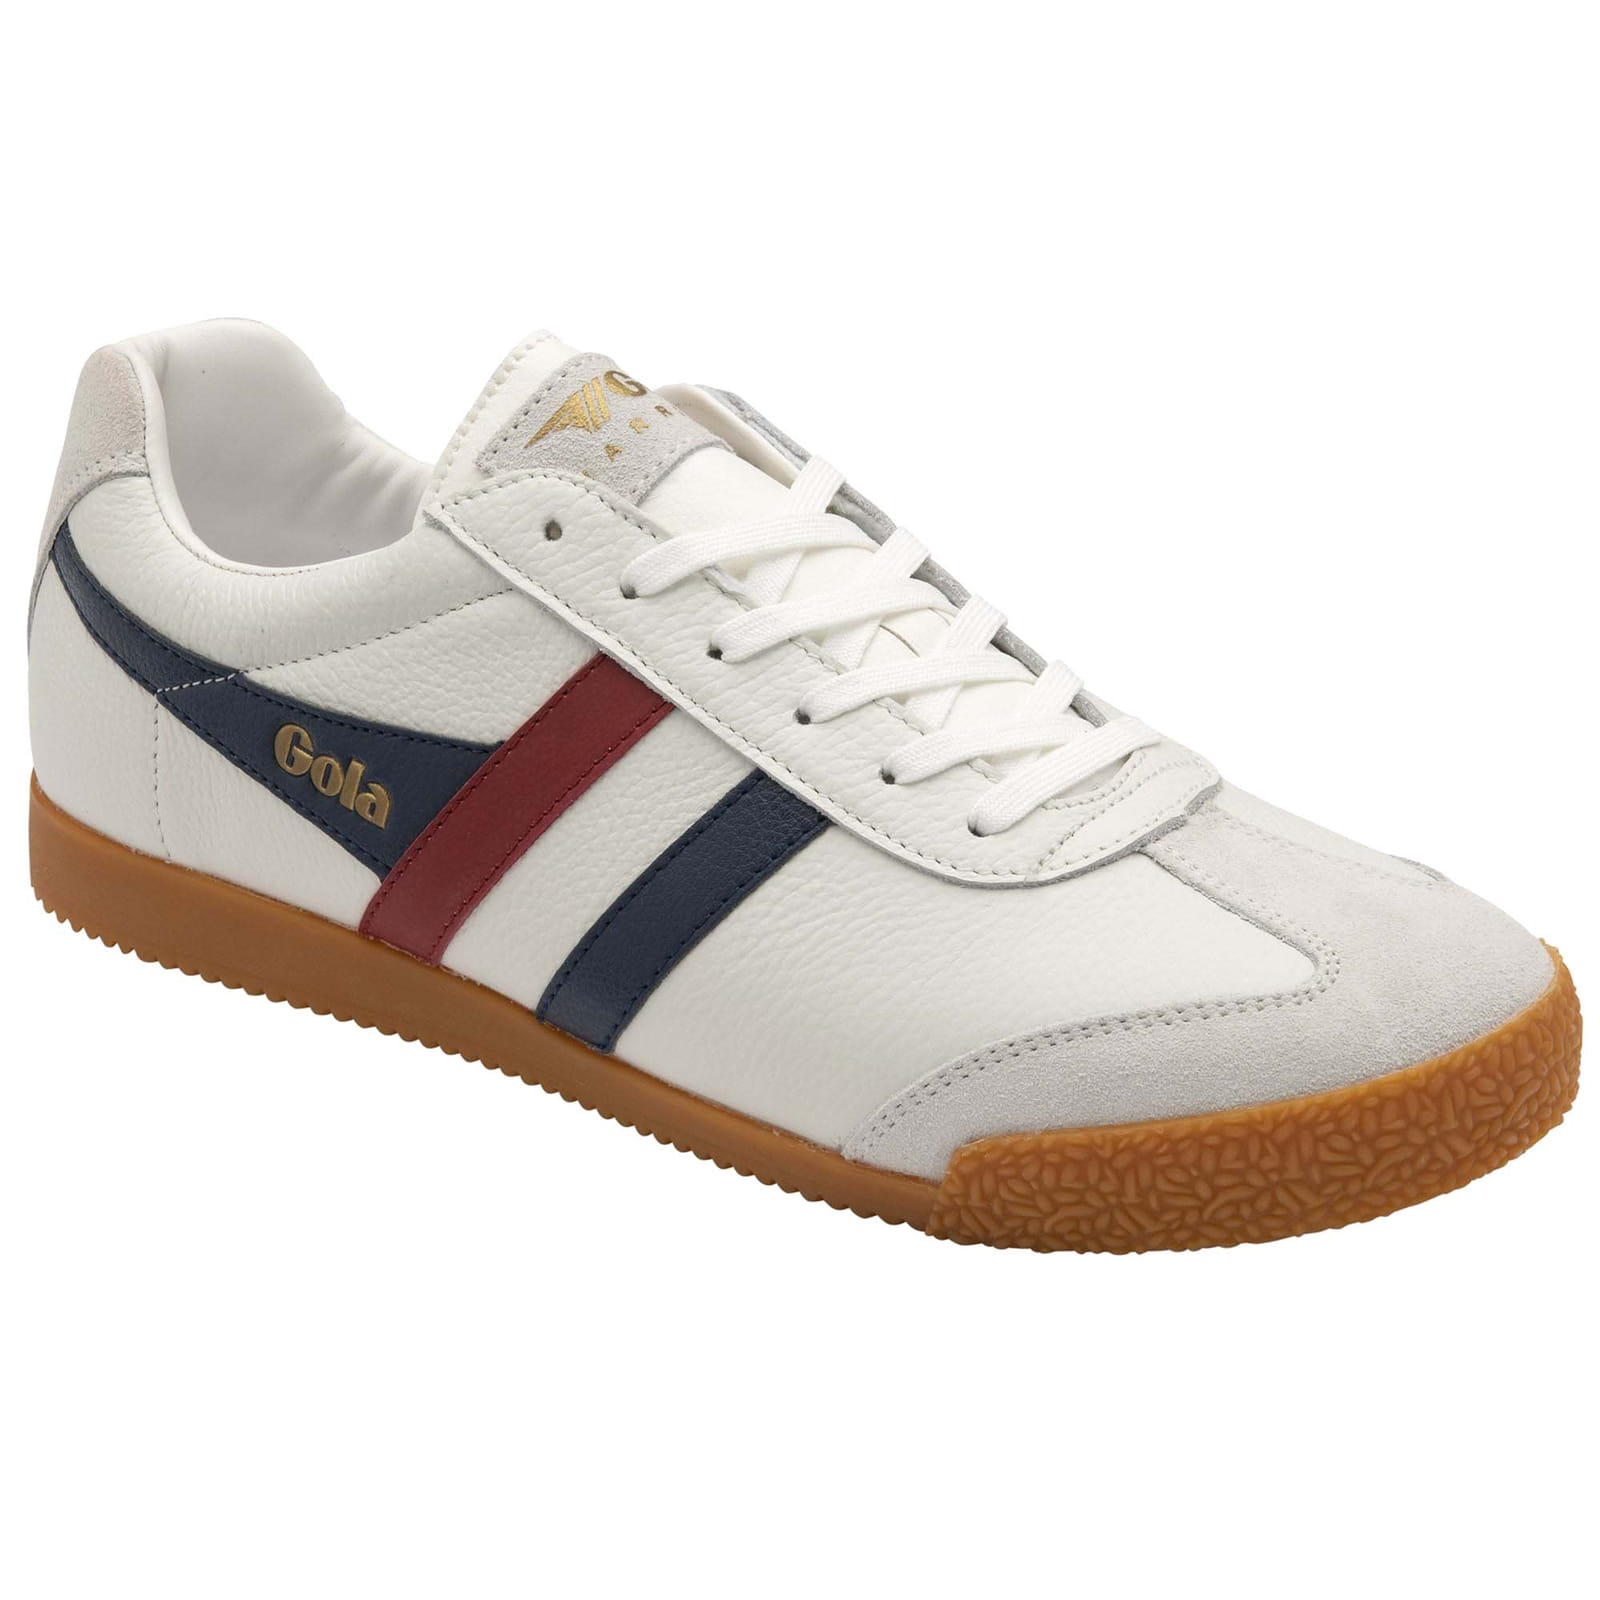 Gola Men's Harrier Leather Trainers Shoes - UK 8